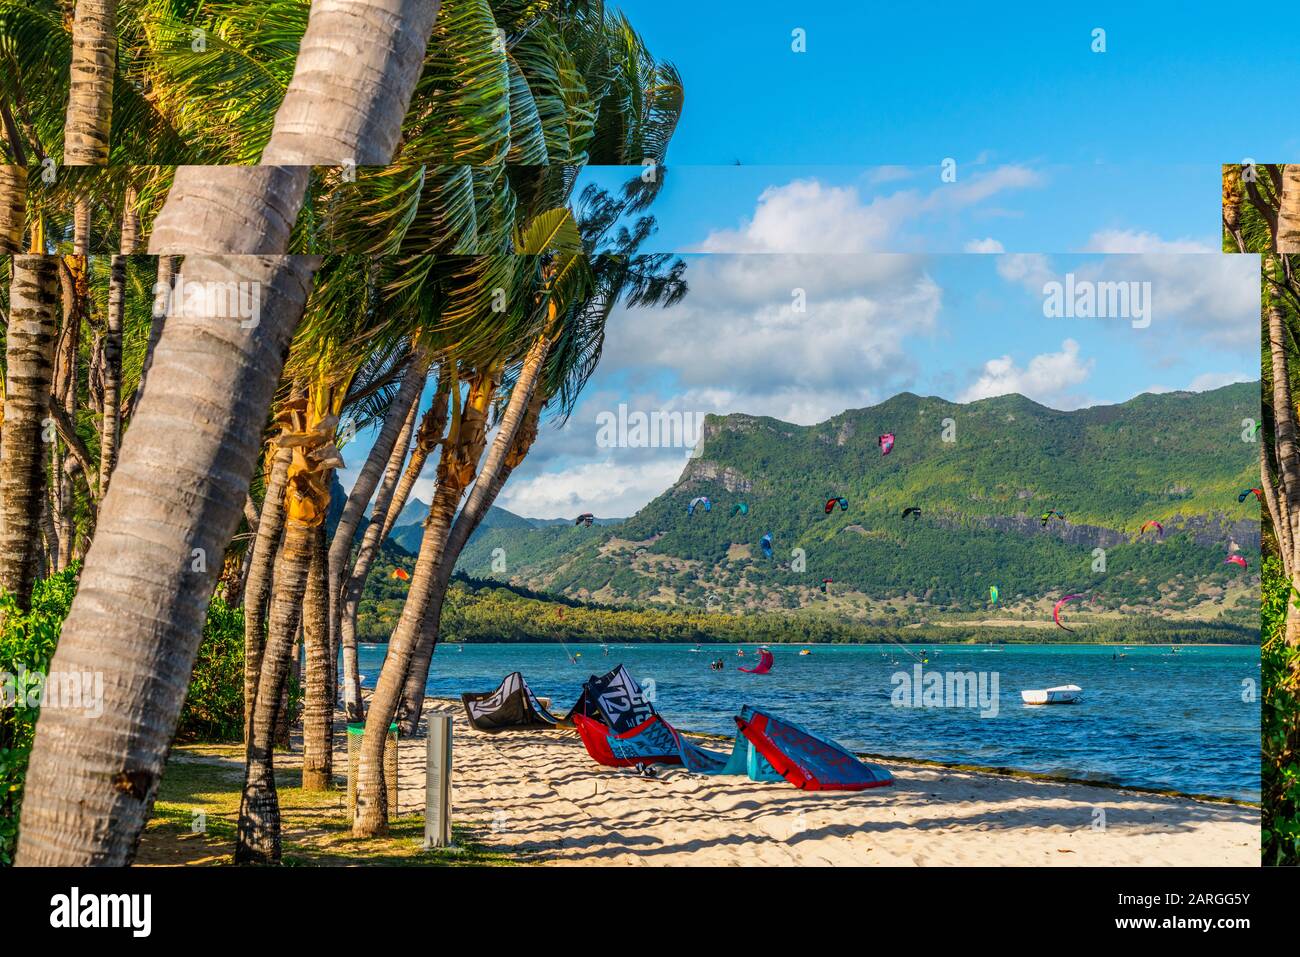 Kitesurf in the ocean seen from tropical palm-fringed beach, Le Morne Brabant, Black River district, Mauritius, Indian Ocean, Africa Stock Photo